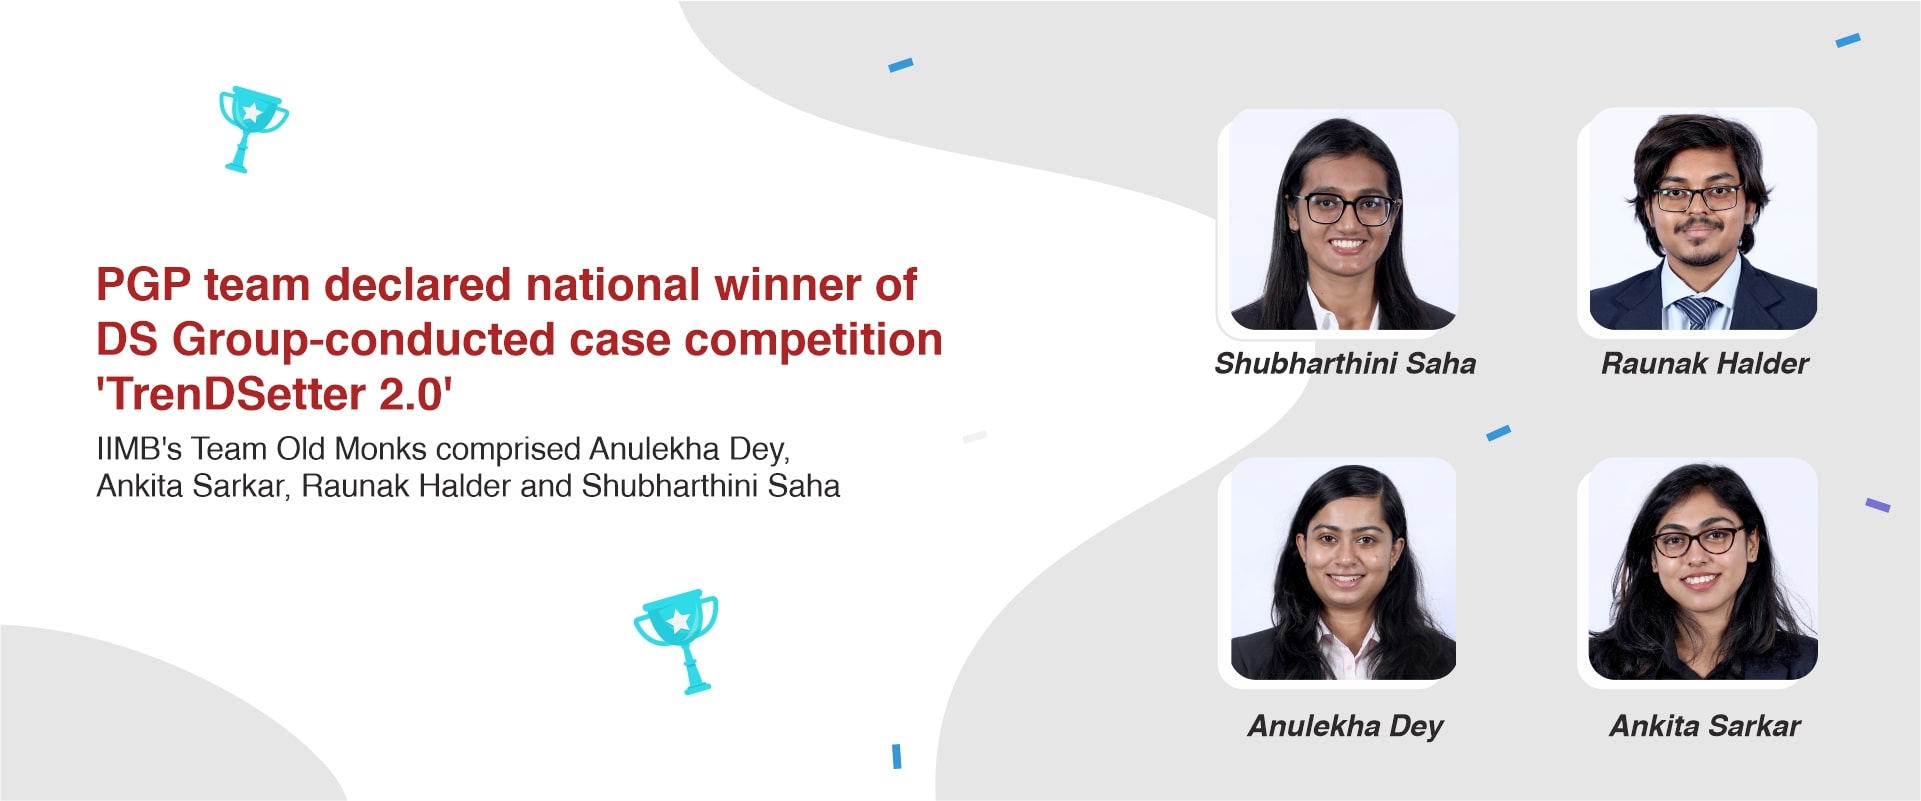 PGP team declared national winner of DS Group-conducted case competition ‘TrenDSetter 2.0’ 